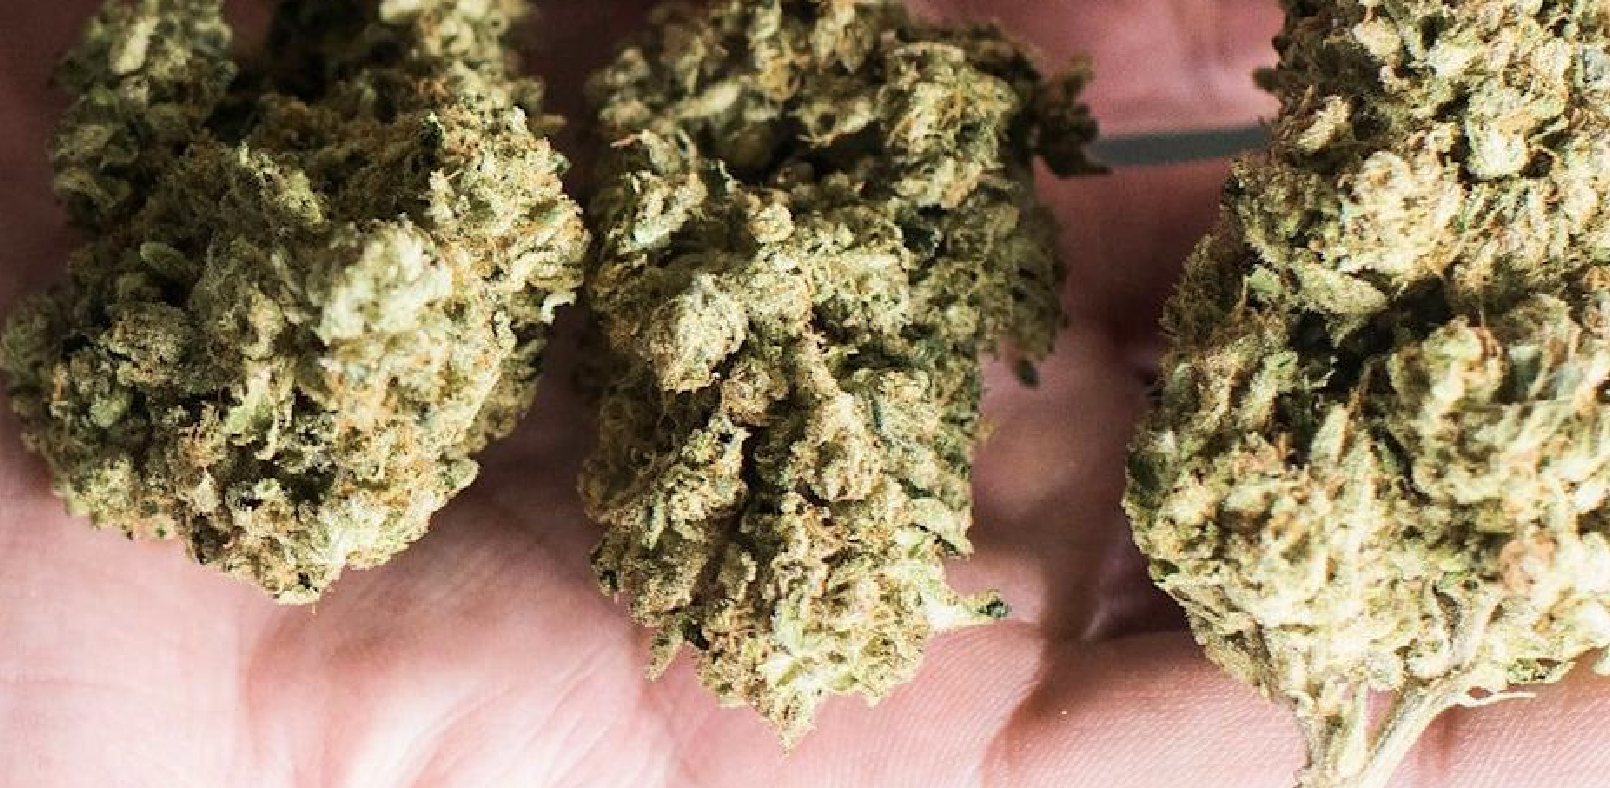 Weed legalisation linked to drop in alcohol, tobacco consumption, study says